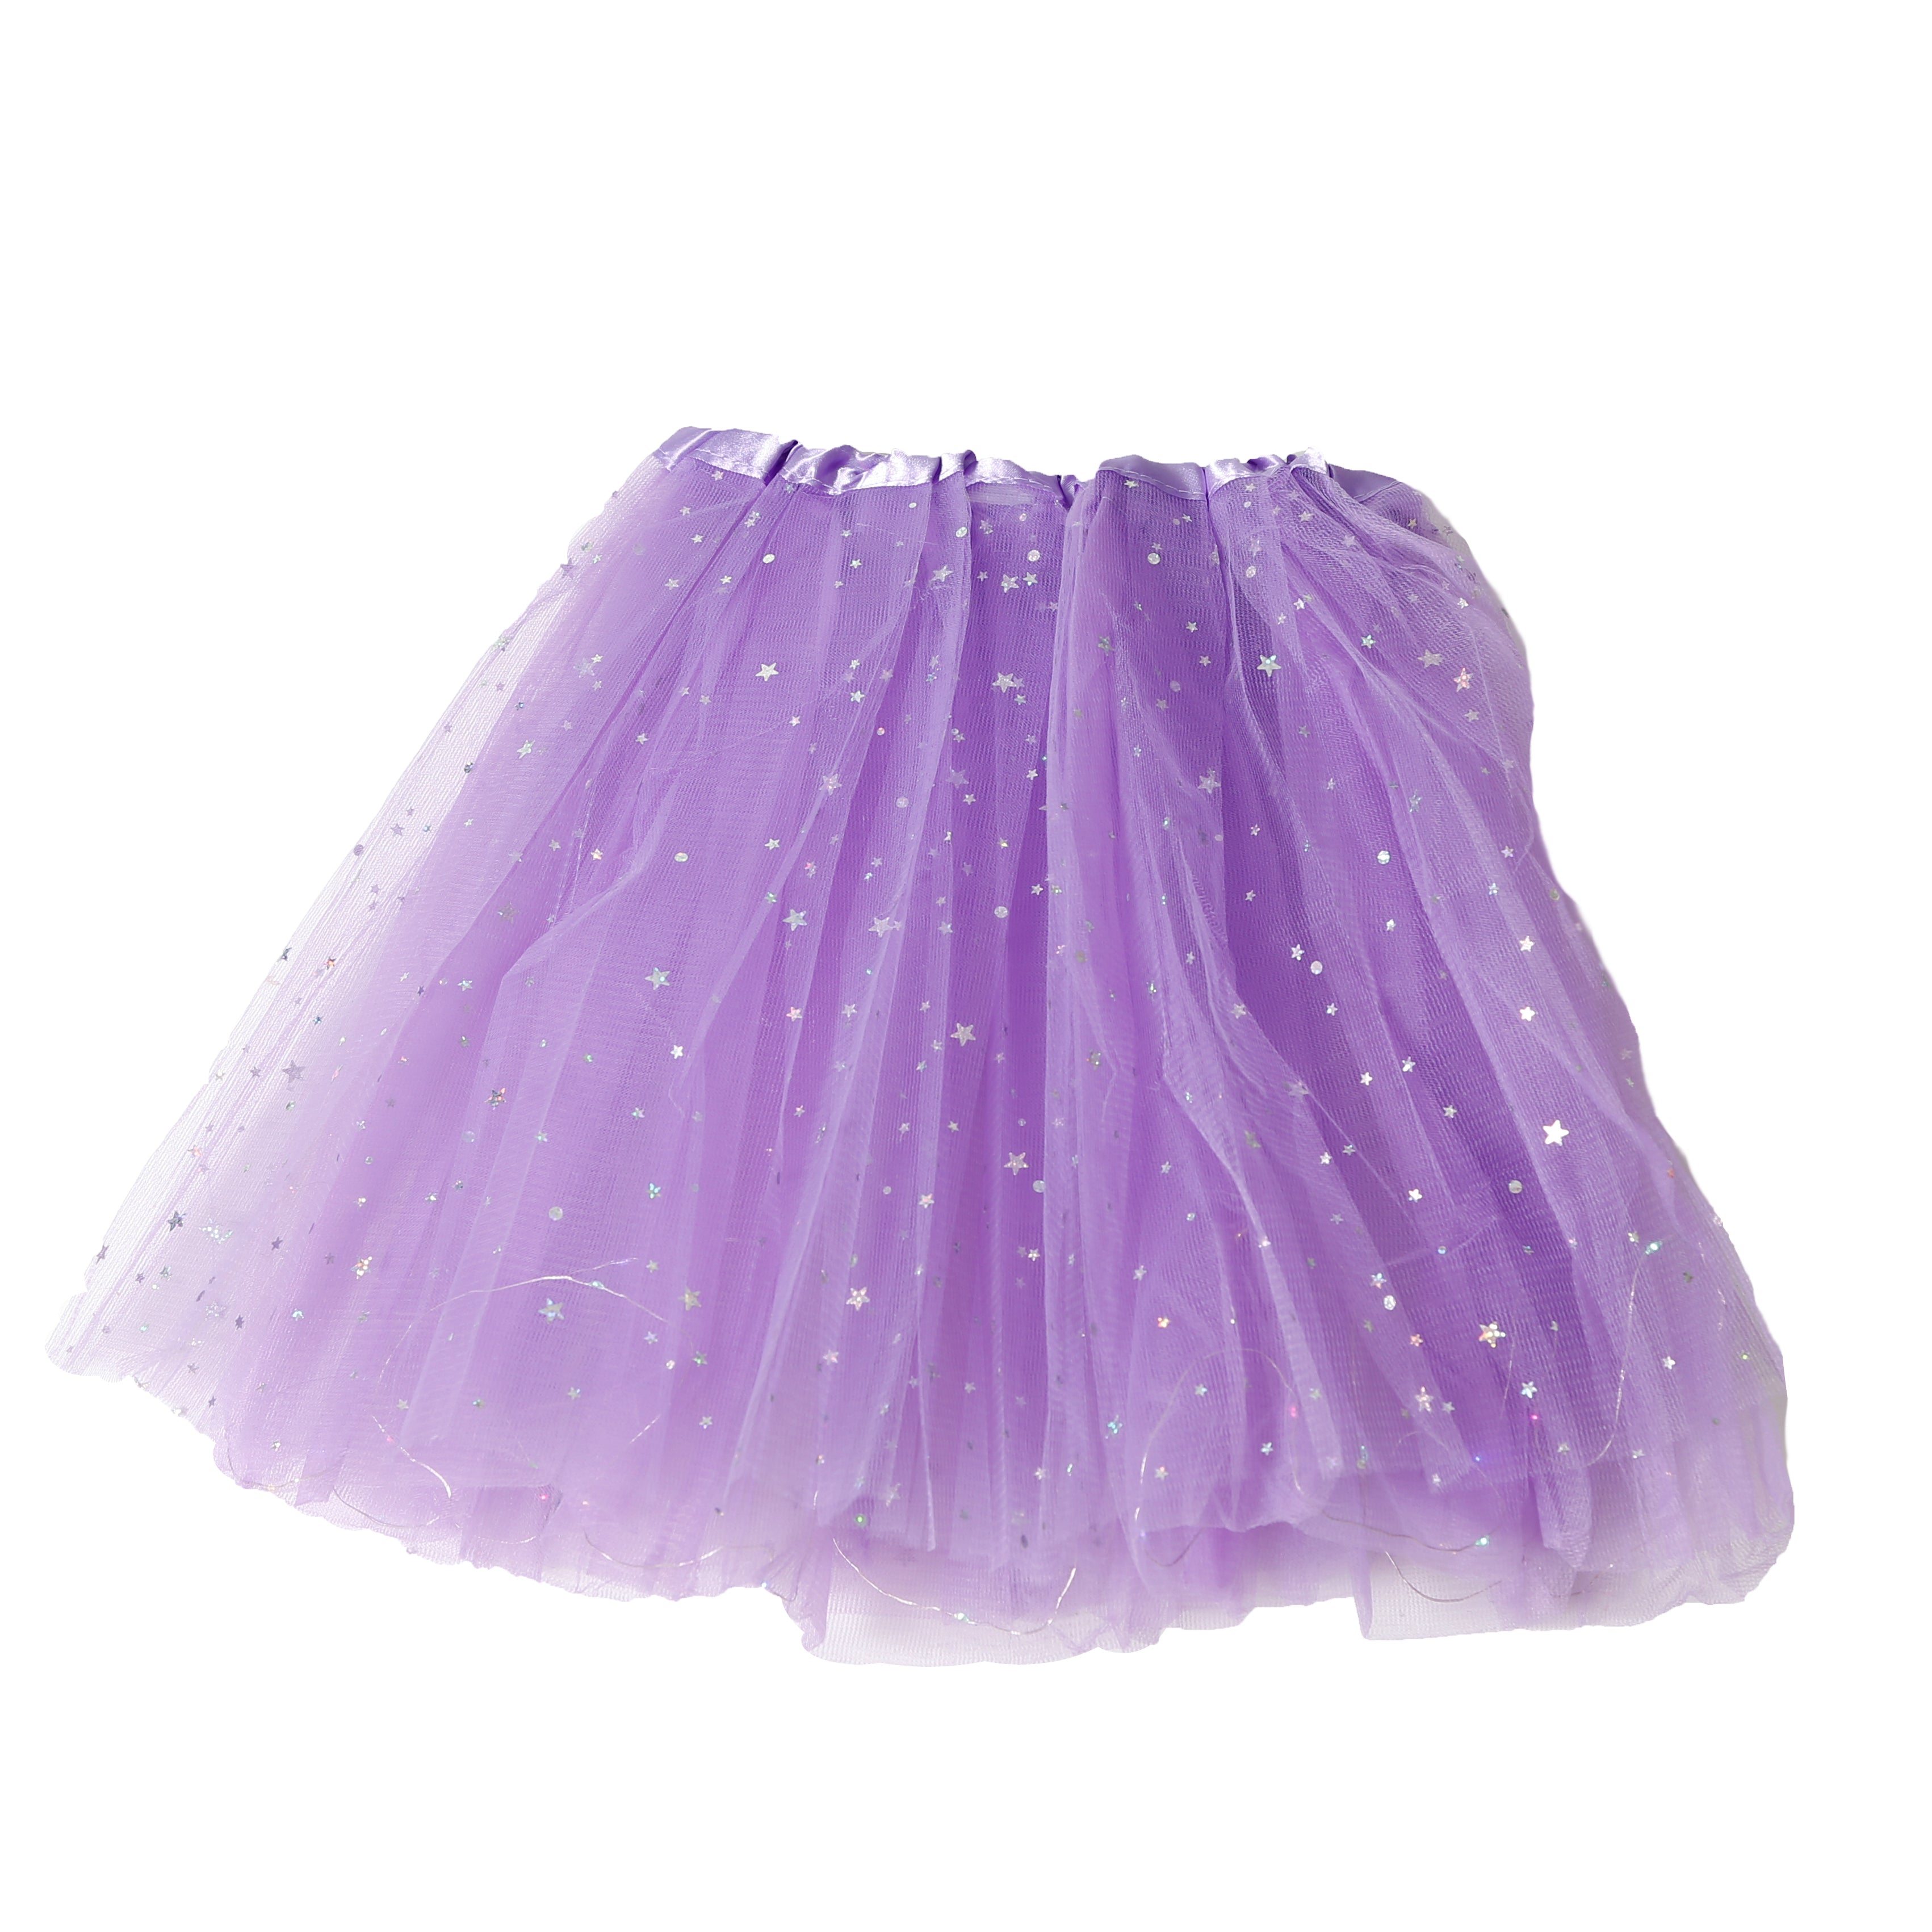 purple light up LED tutu skirt Electro Glow | South Africa's Best LED Festival Gear & Rave Clothes - festivals outfits, clothes festival, festival clothing south africa, festival ideas outfits, festival outfits rave, festival wear, steam punk goggle, rave glasses, outfit for a rave, kaleidoscope glasses, diffraction glasses, clothes for a rave, rave sunglasses, spectral glasses, rave goggles, clothes for a rave, rave clothing south africa, festival wear south africa, accessories festival, rave sunglasses